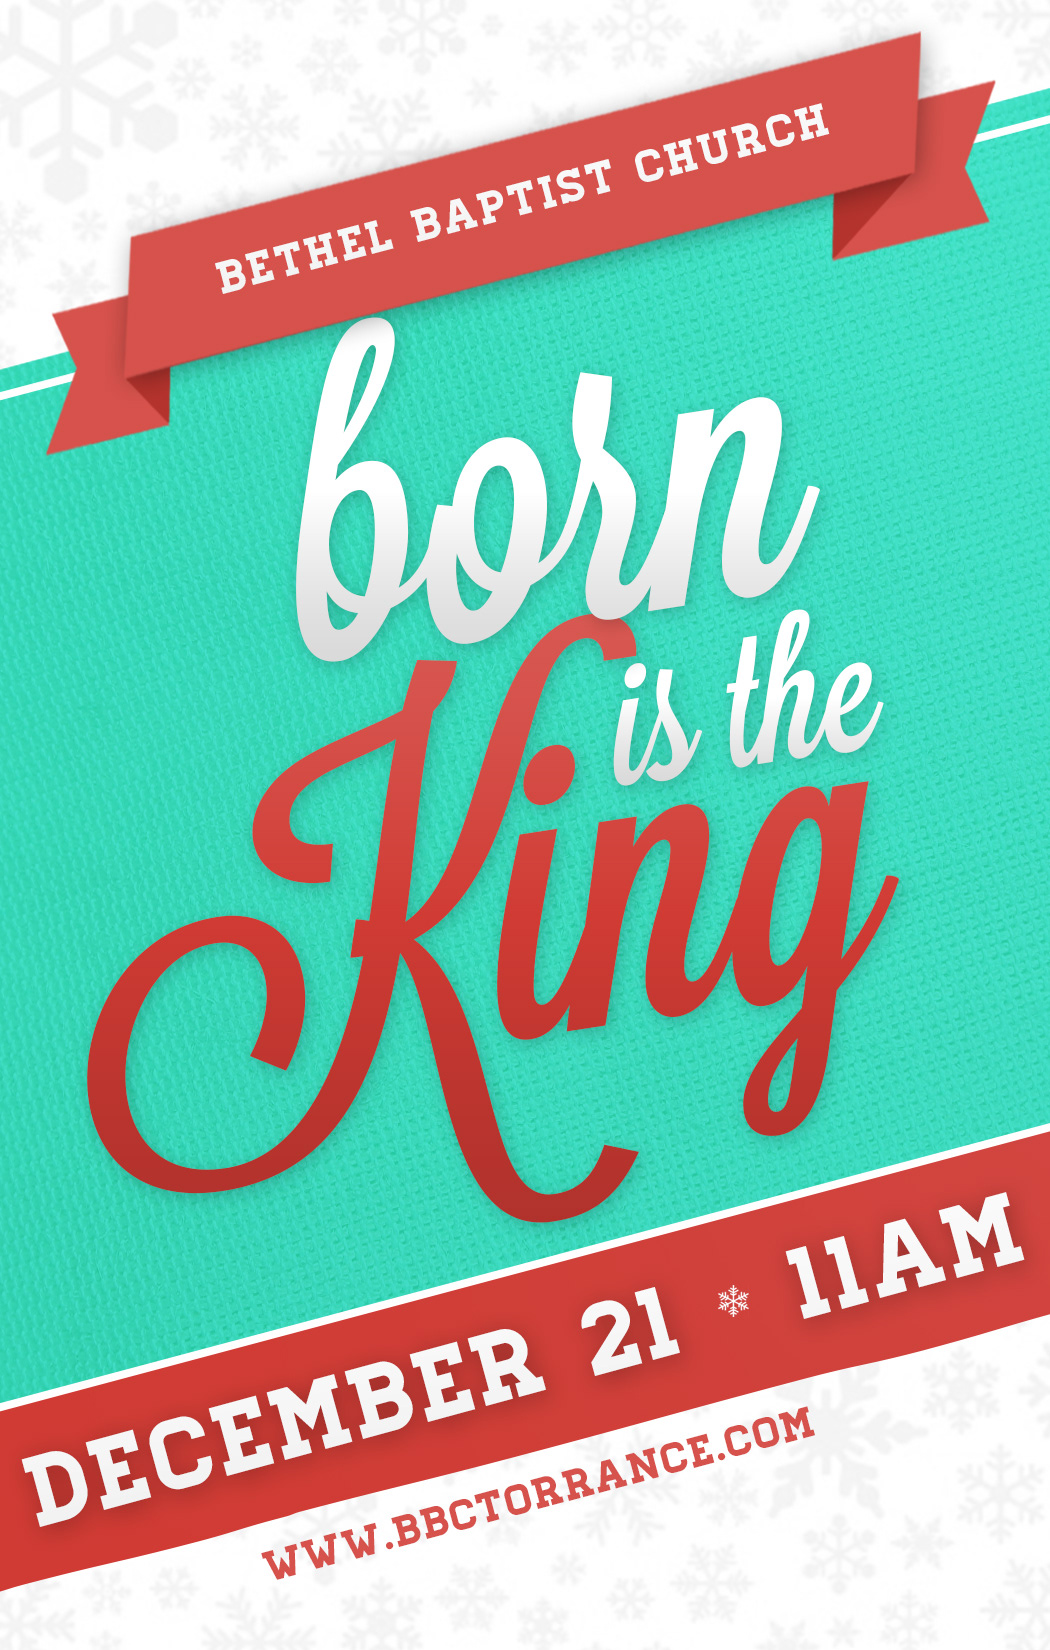 Born is the king tract Invitation church design Christmas